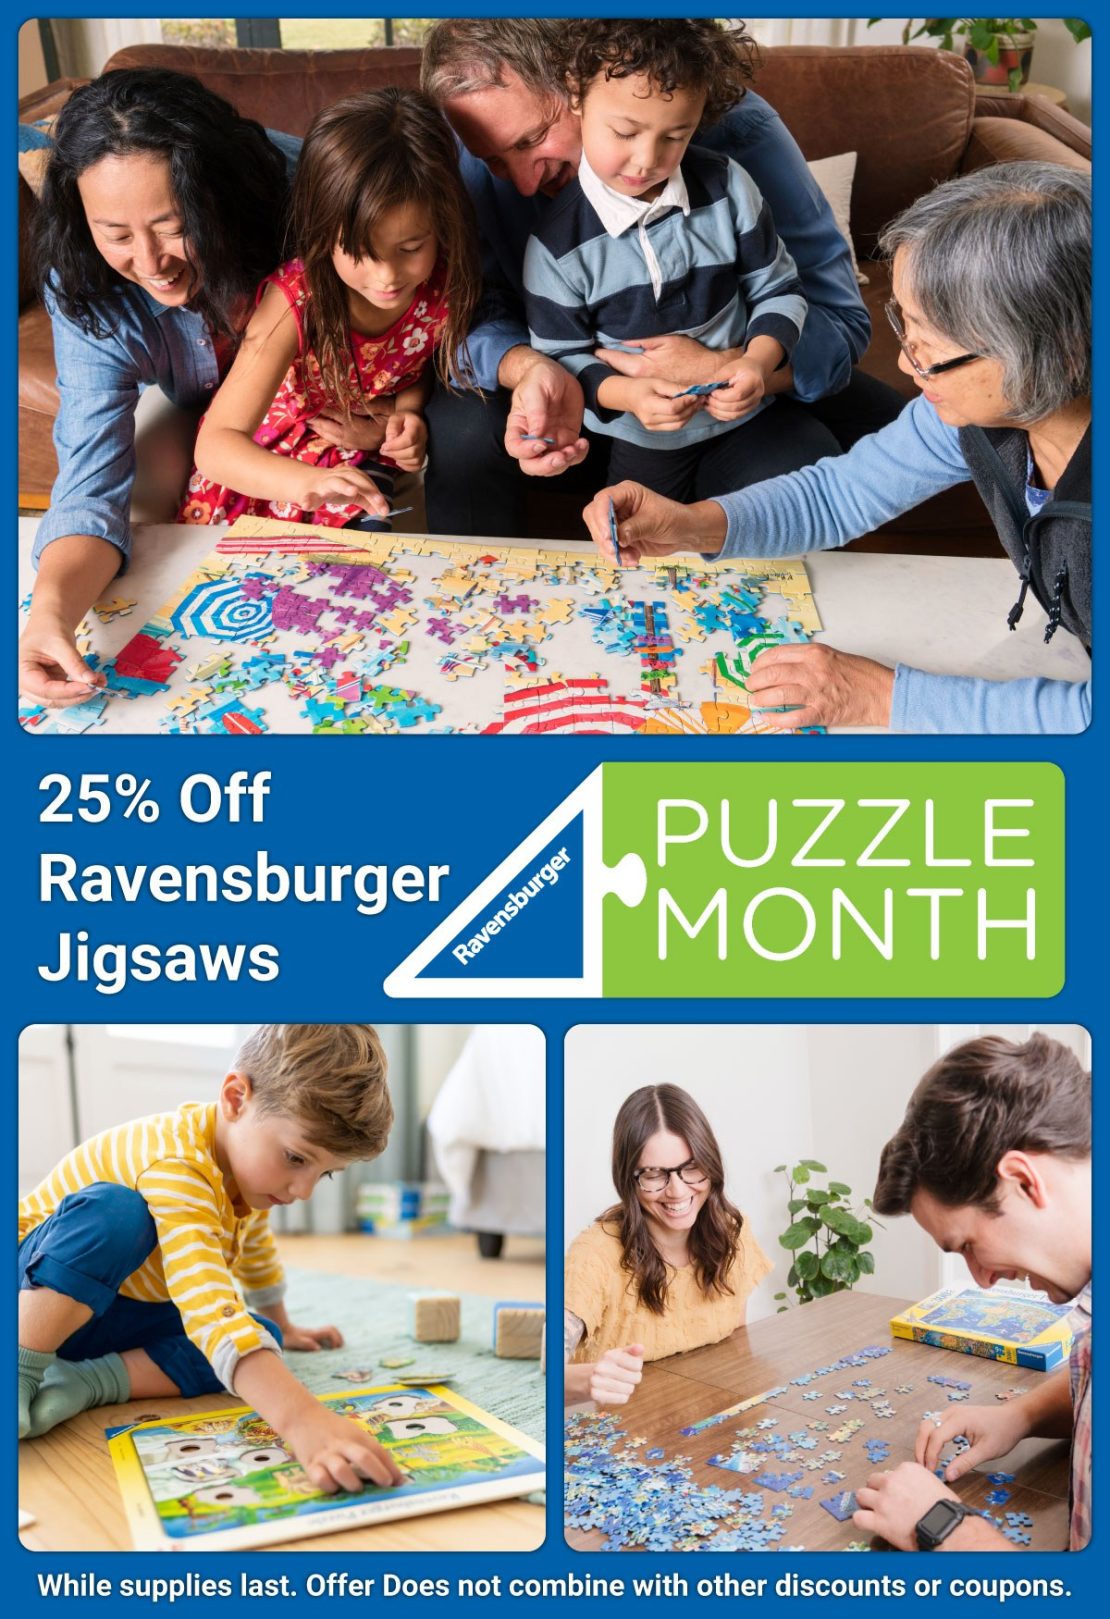 01 10 24 email ravensburger puzzle month lifestyle